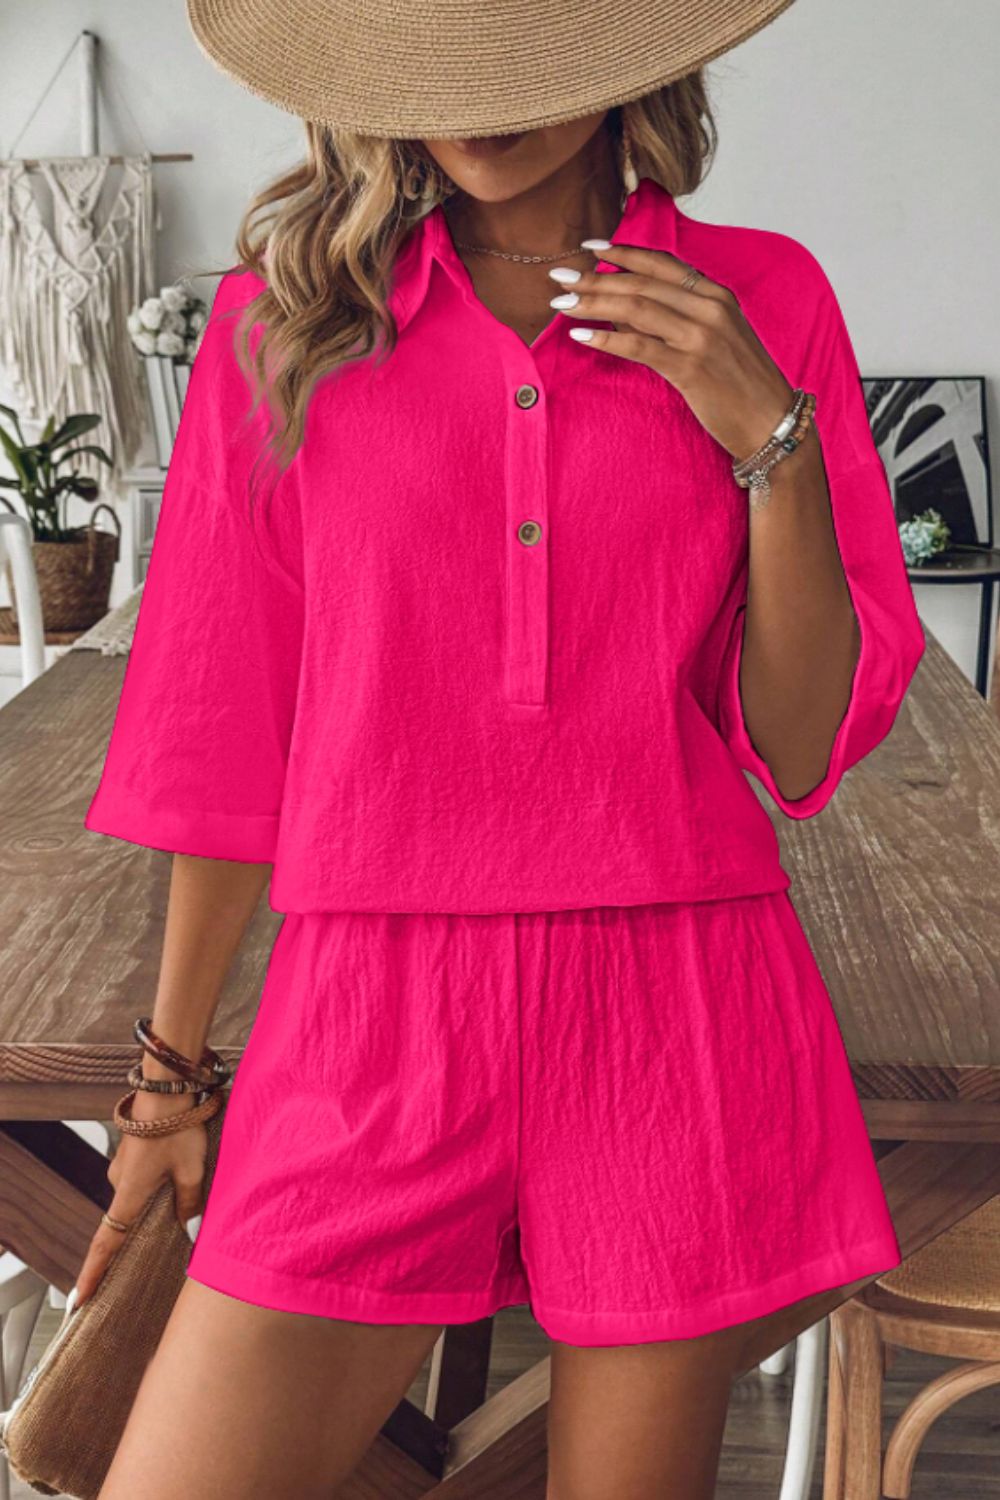 Collared Neck Half Sleeve Top and Shorts Set Hot Pink